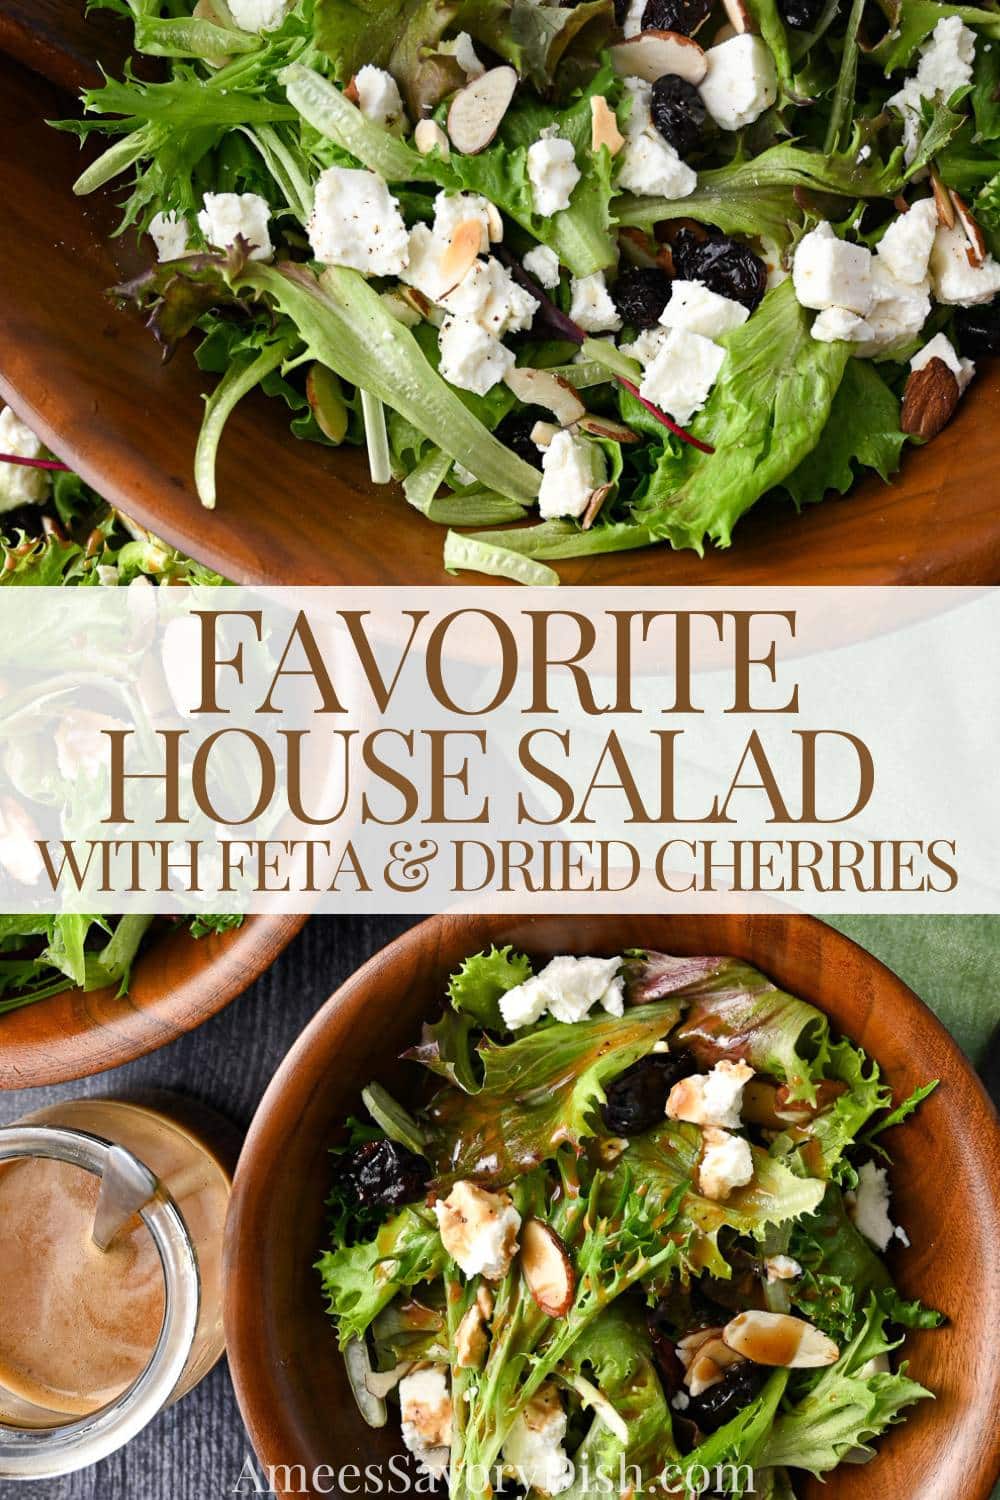 This house salad features toasted almonds, dried cherries, crumbled feta, and crisp salad greens tossed in the BEST creamy balsamic vinaigrette dressing. via @Ameessavorydish